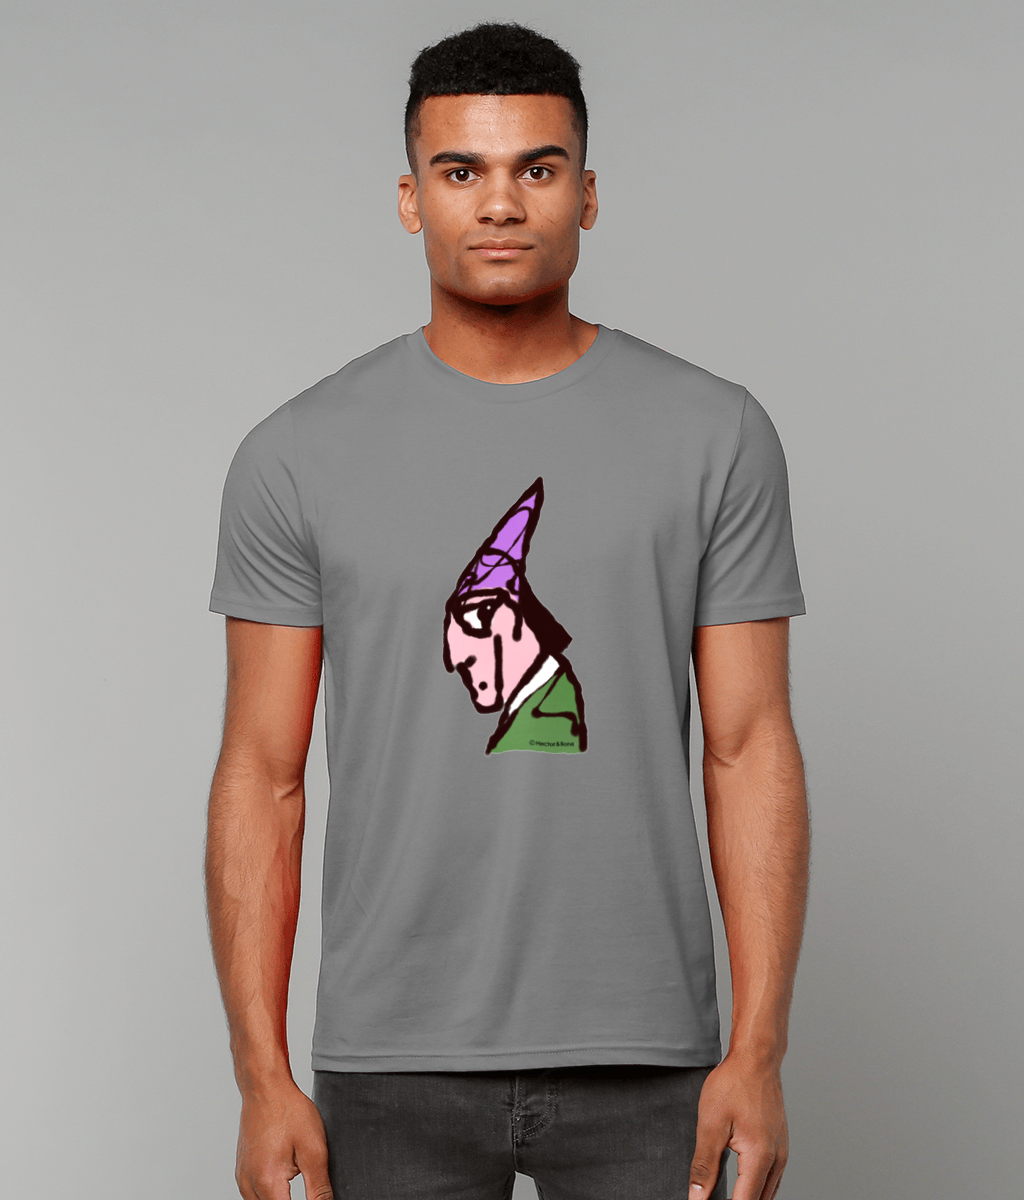 Wizard T-shirt - Young man wearing a illustrated magical wizard t-shirt in mid heather grey colour vegan cotton by Hector and Bone